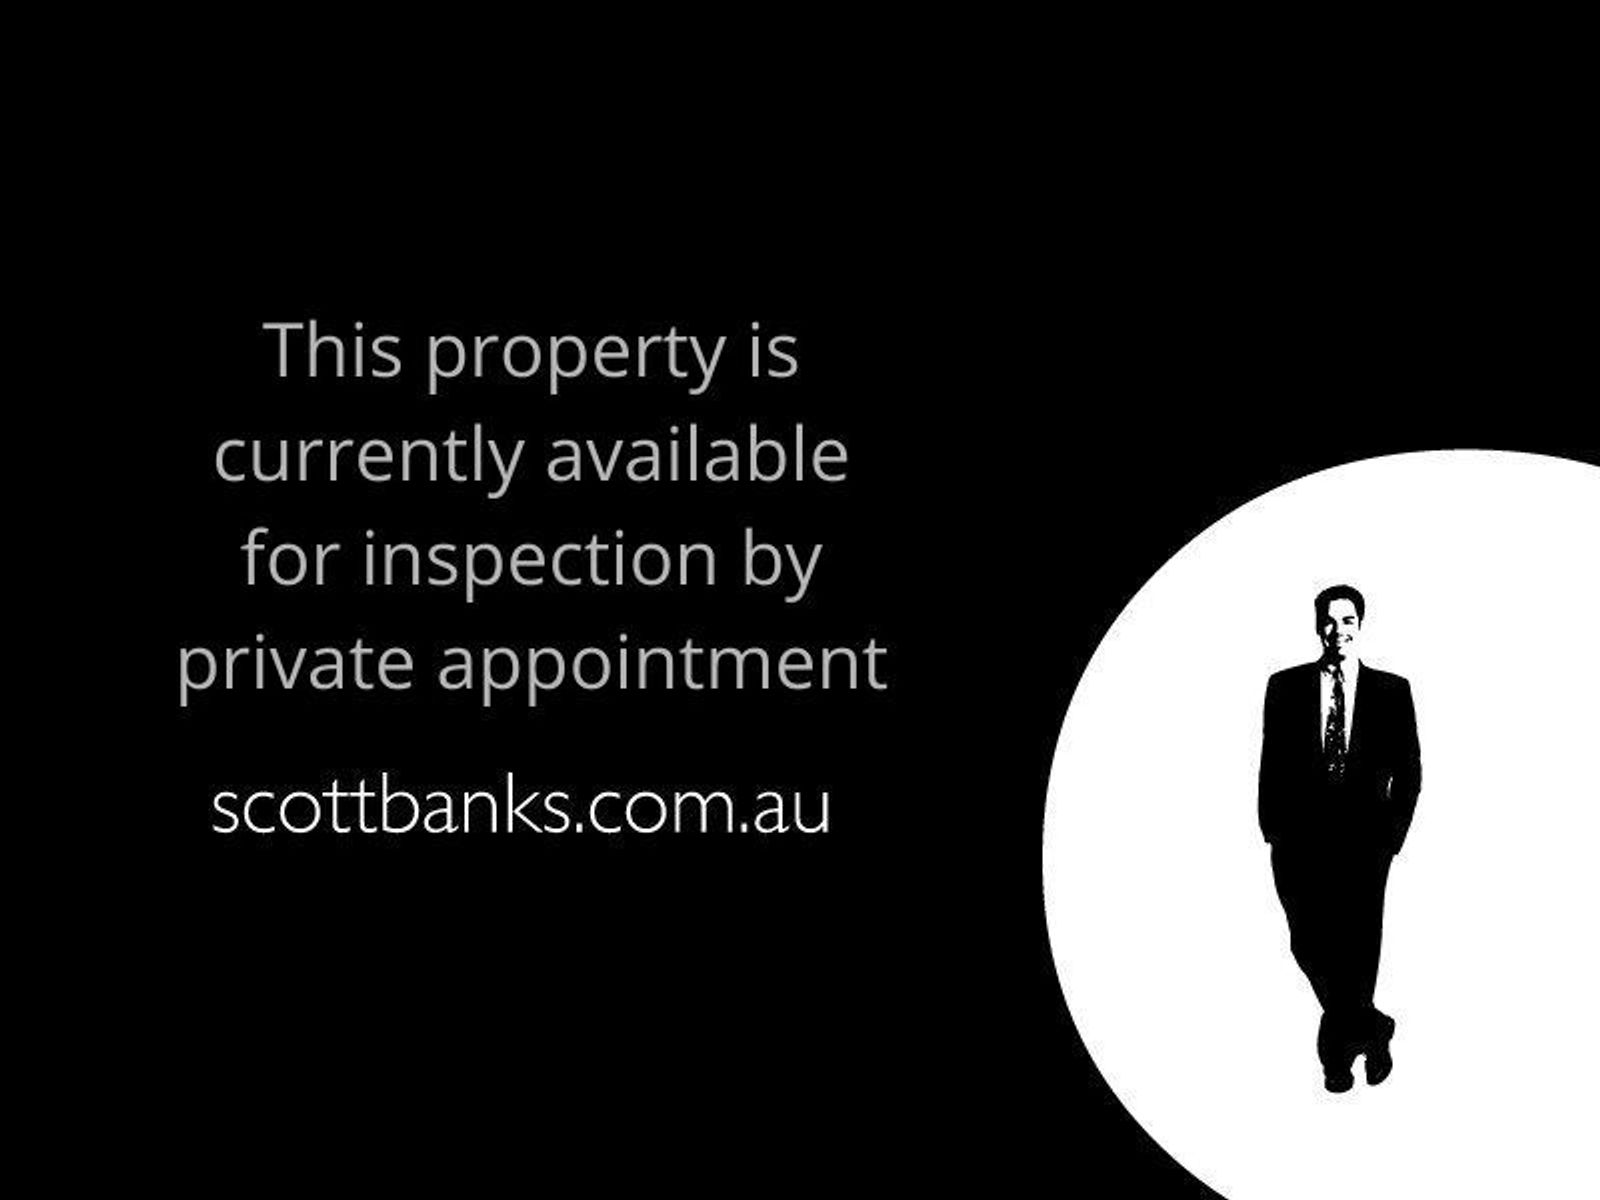 This property is currently avaliable for inspection by private appointment